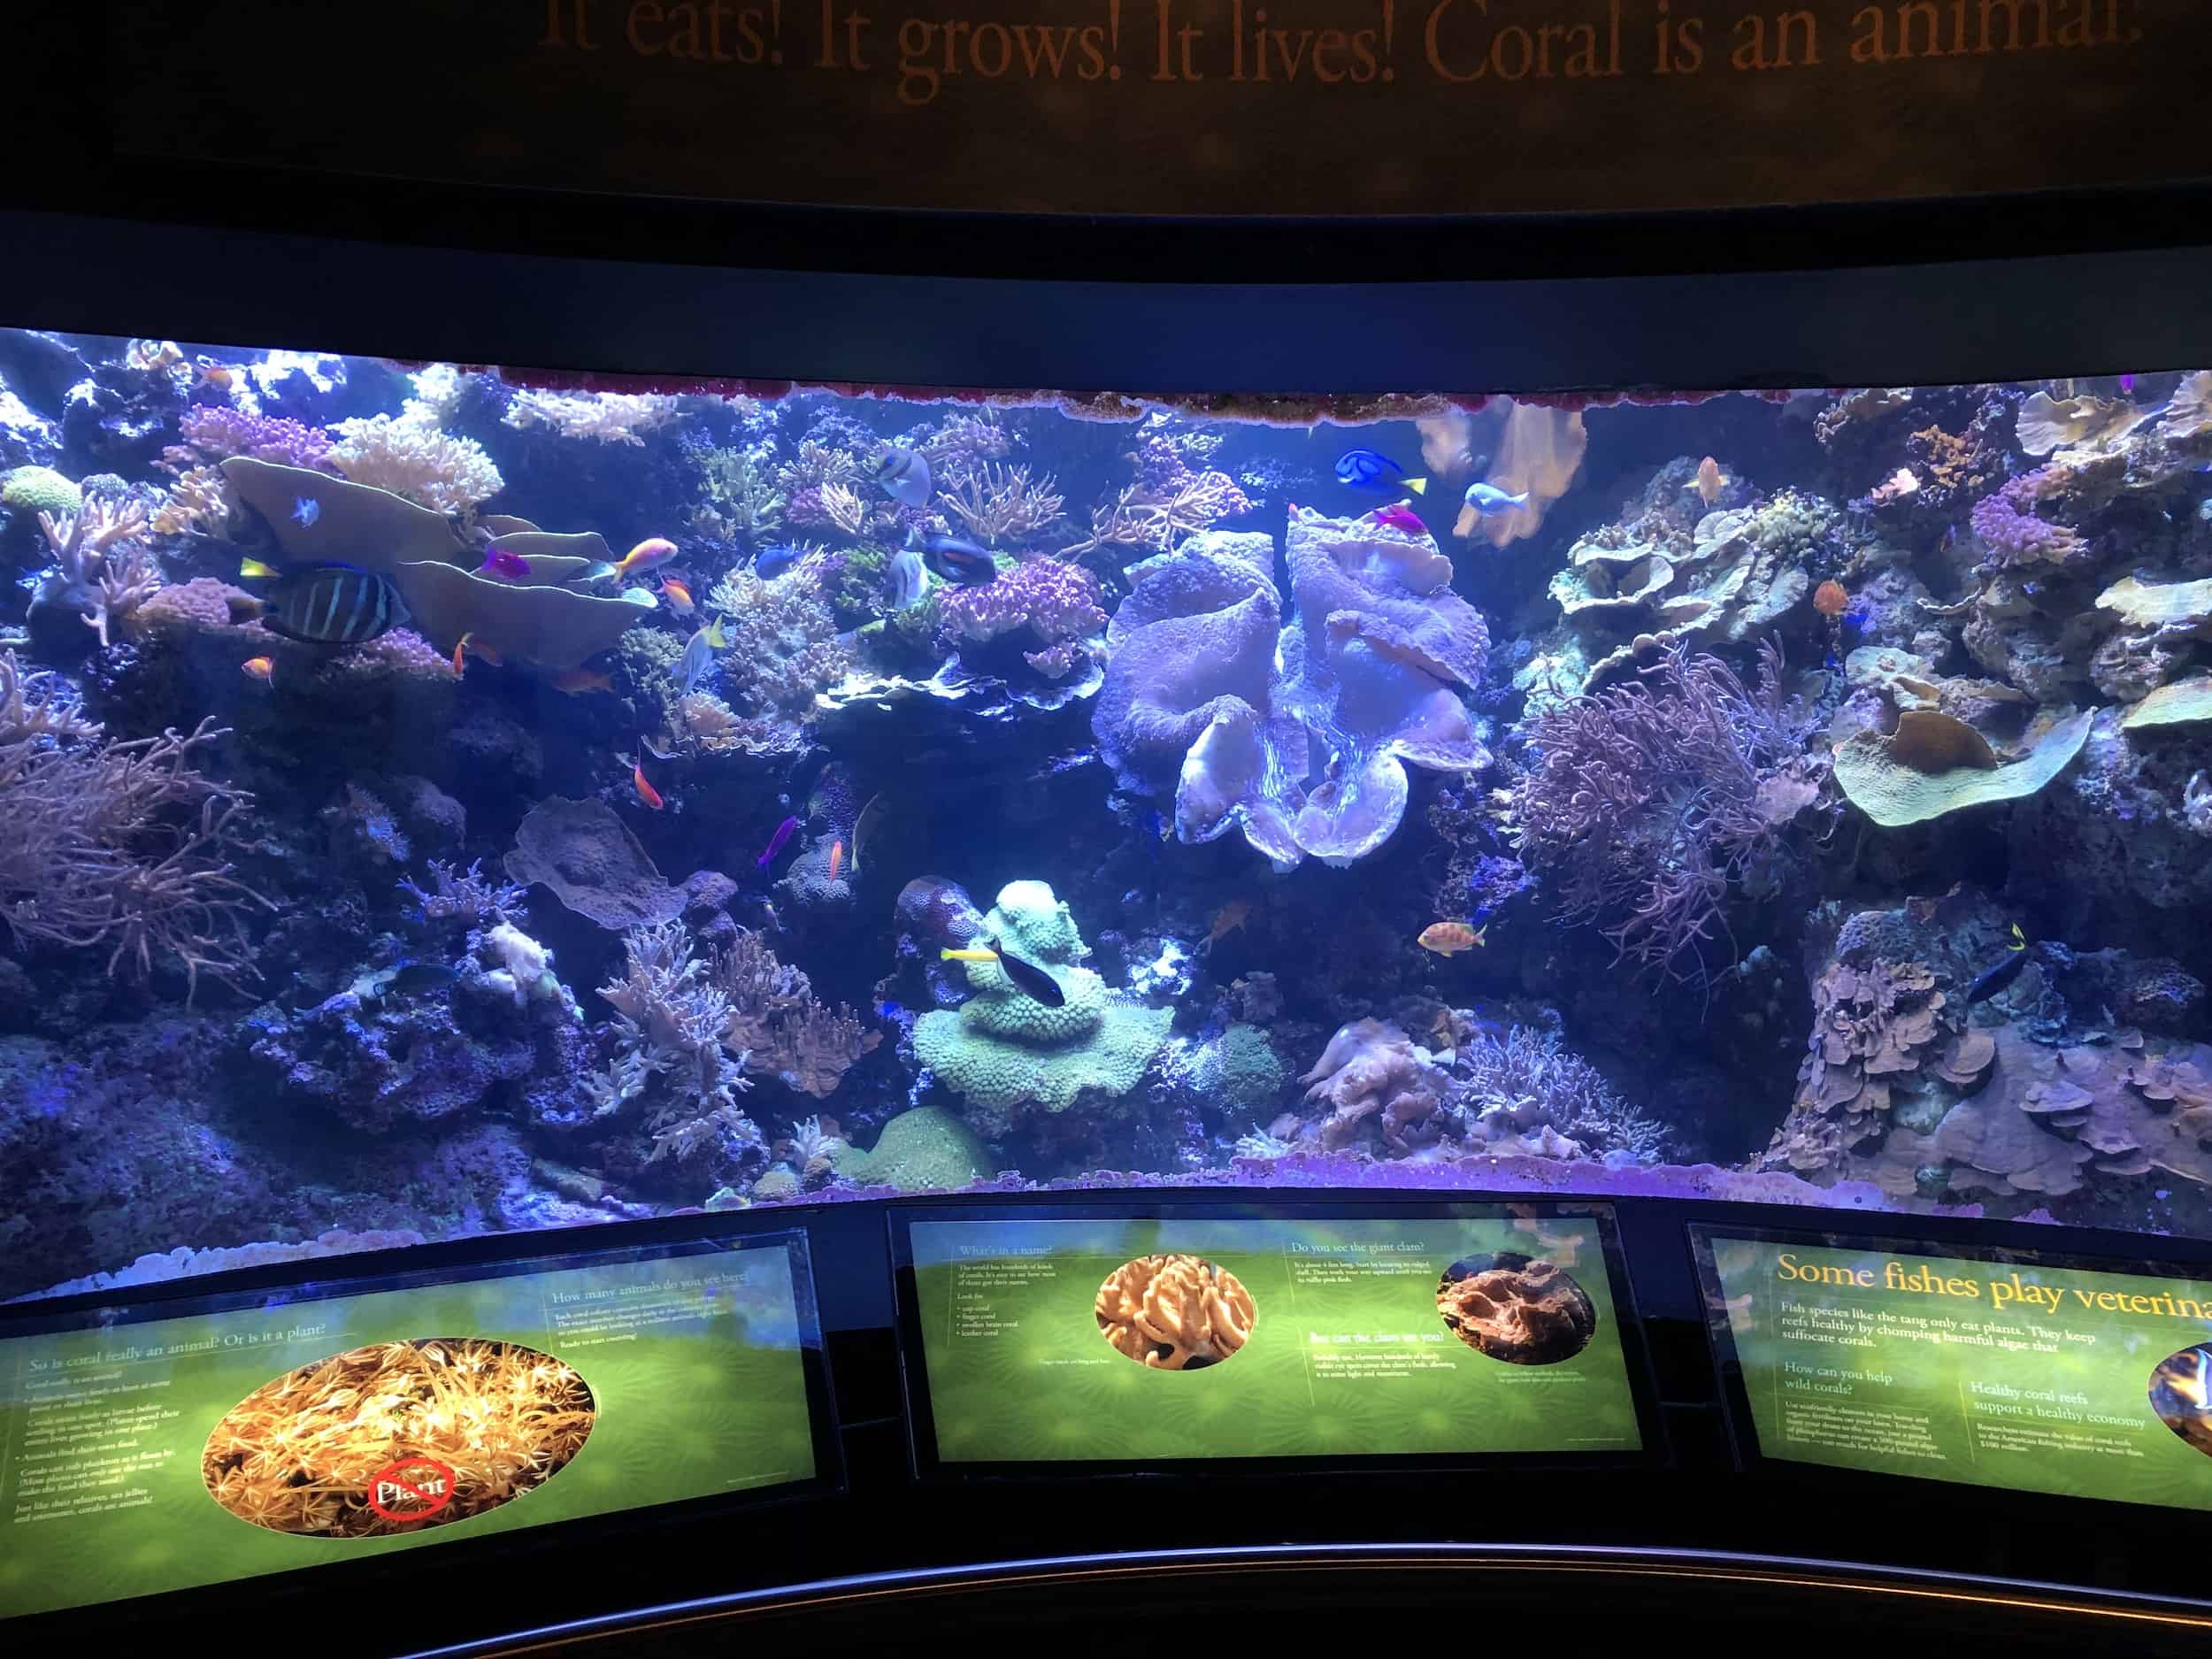 Information about coral at Wild Reef at the Shedd Aquarium in Chicago, Illinois